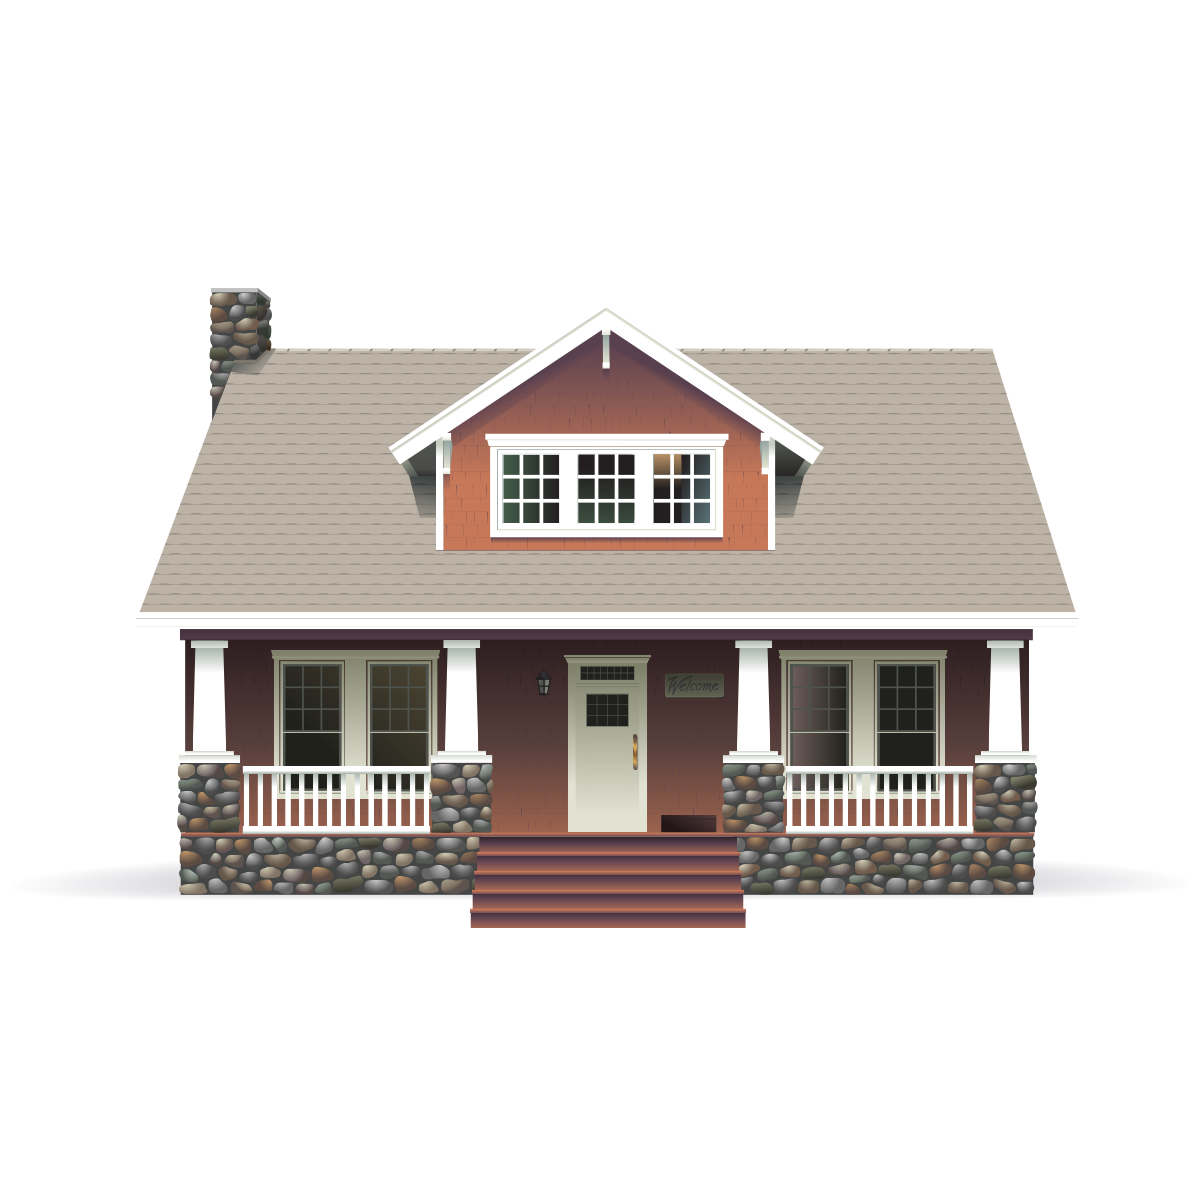 Brown bungalow house with beige roof and stone porch illustration